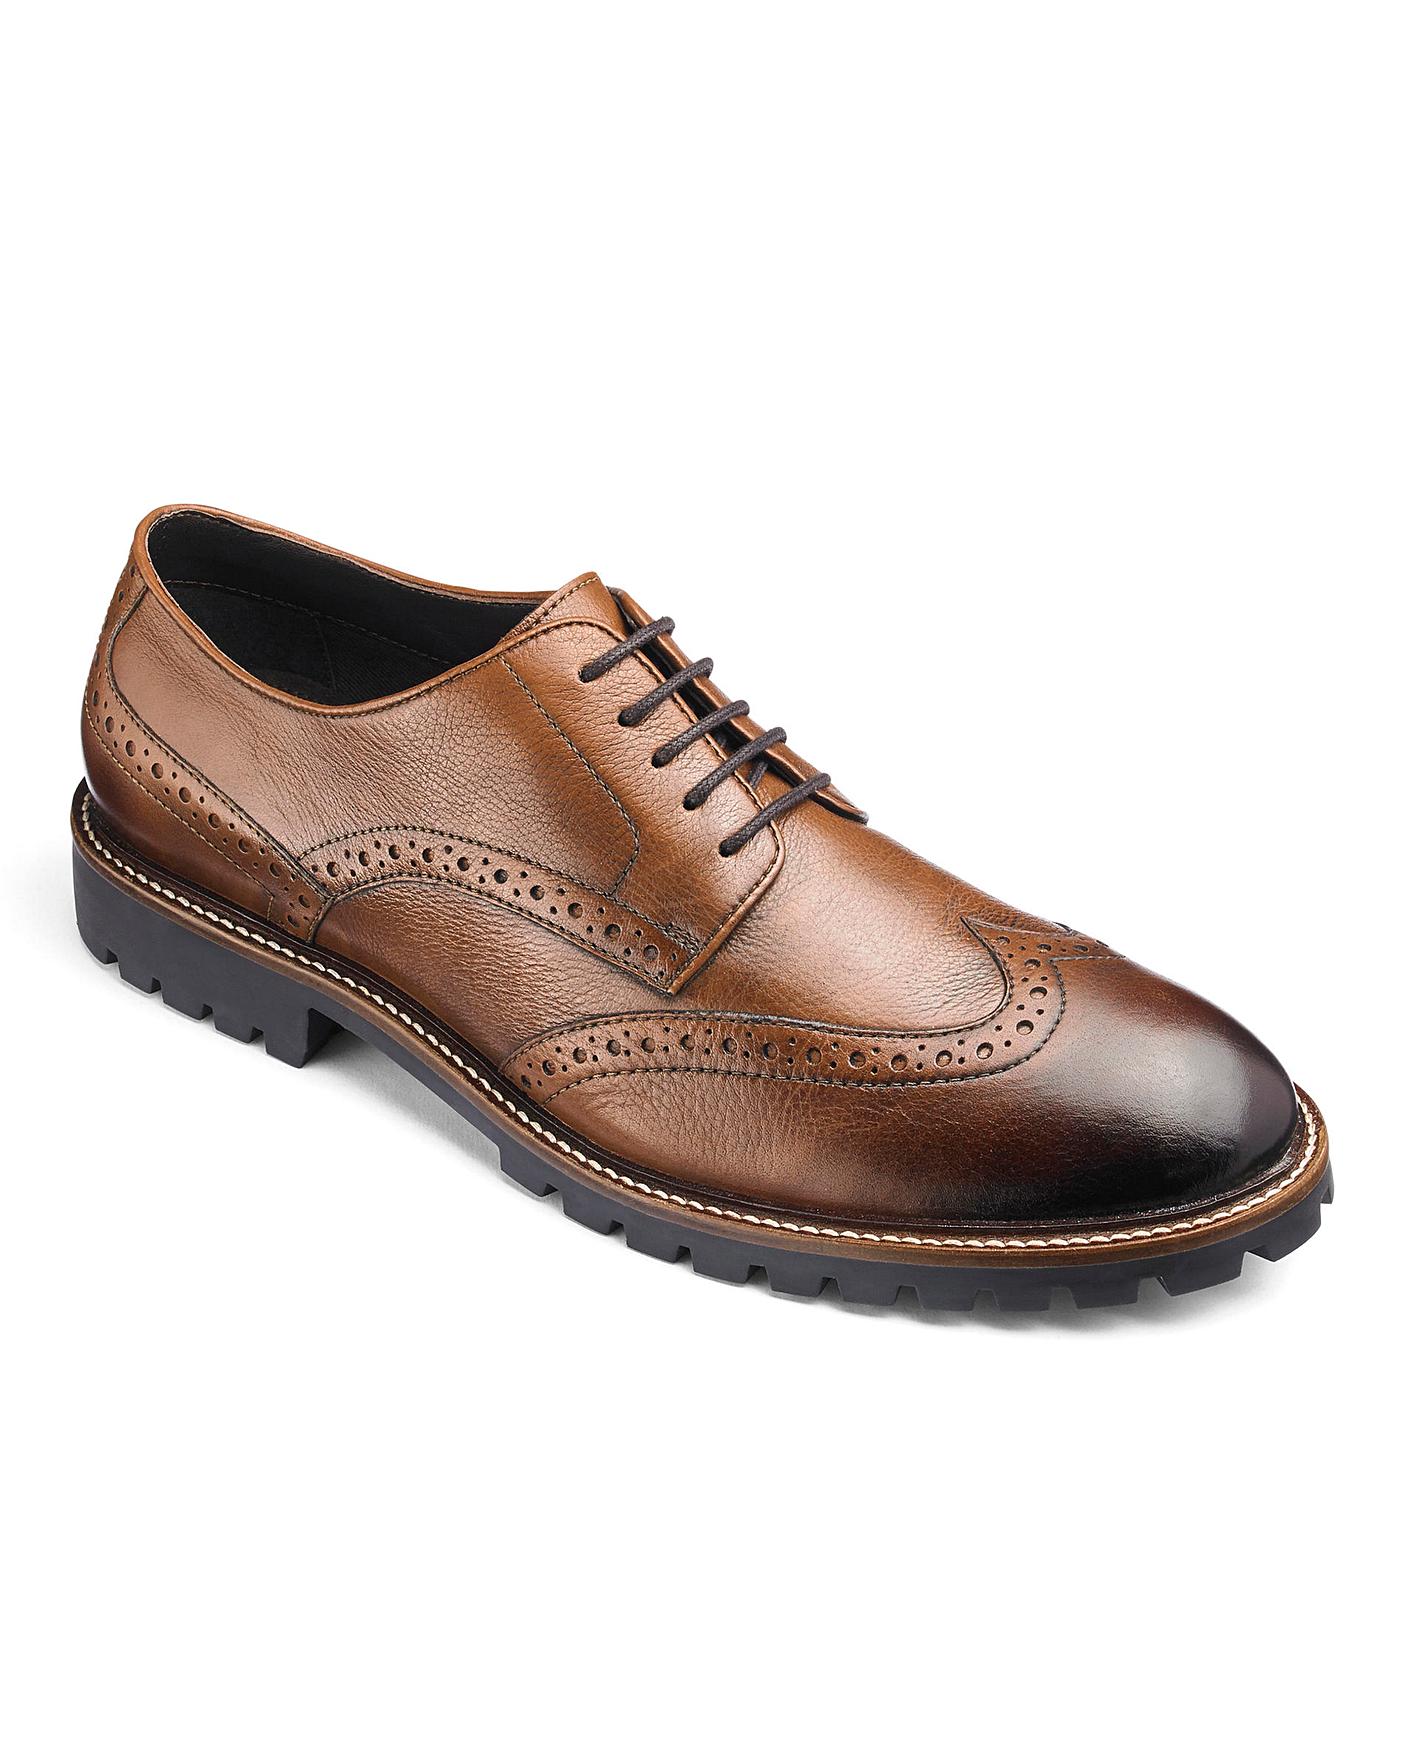 Leather Brogues Extra Wide Fit | J D Williams